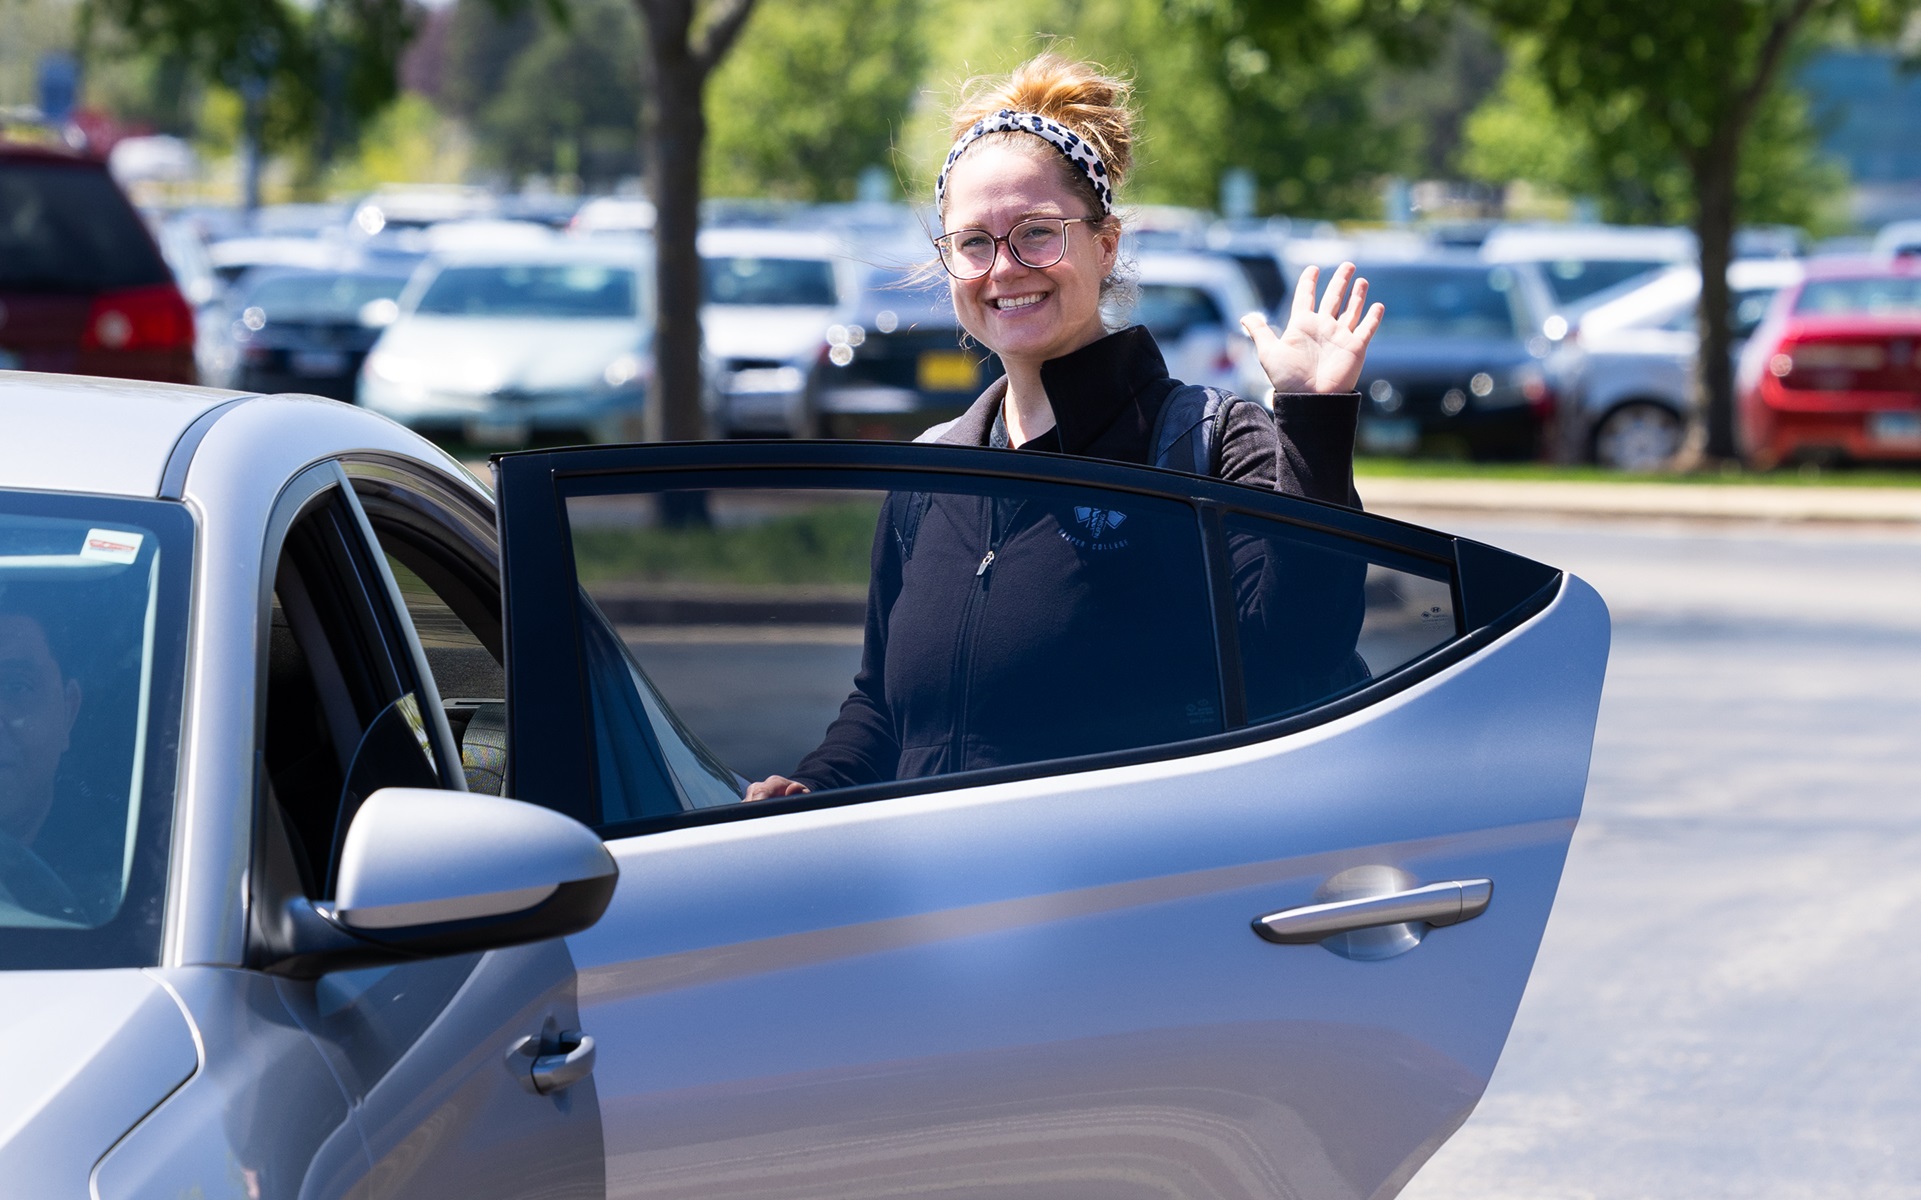 Karissa Olsen takes a discounted Lyft ride to get to and from Harper College.